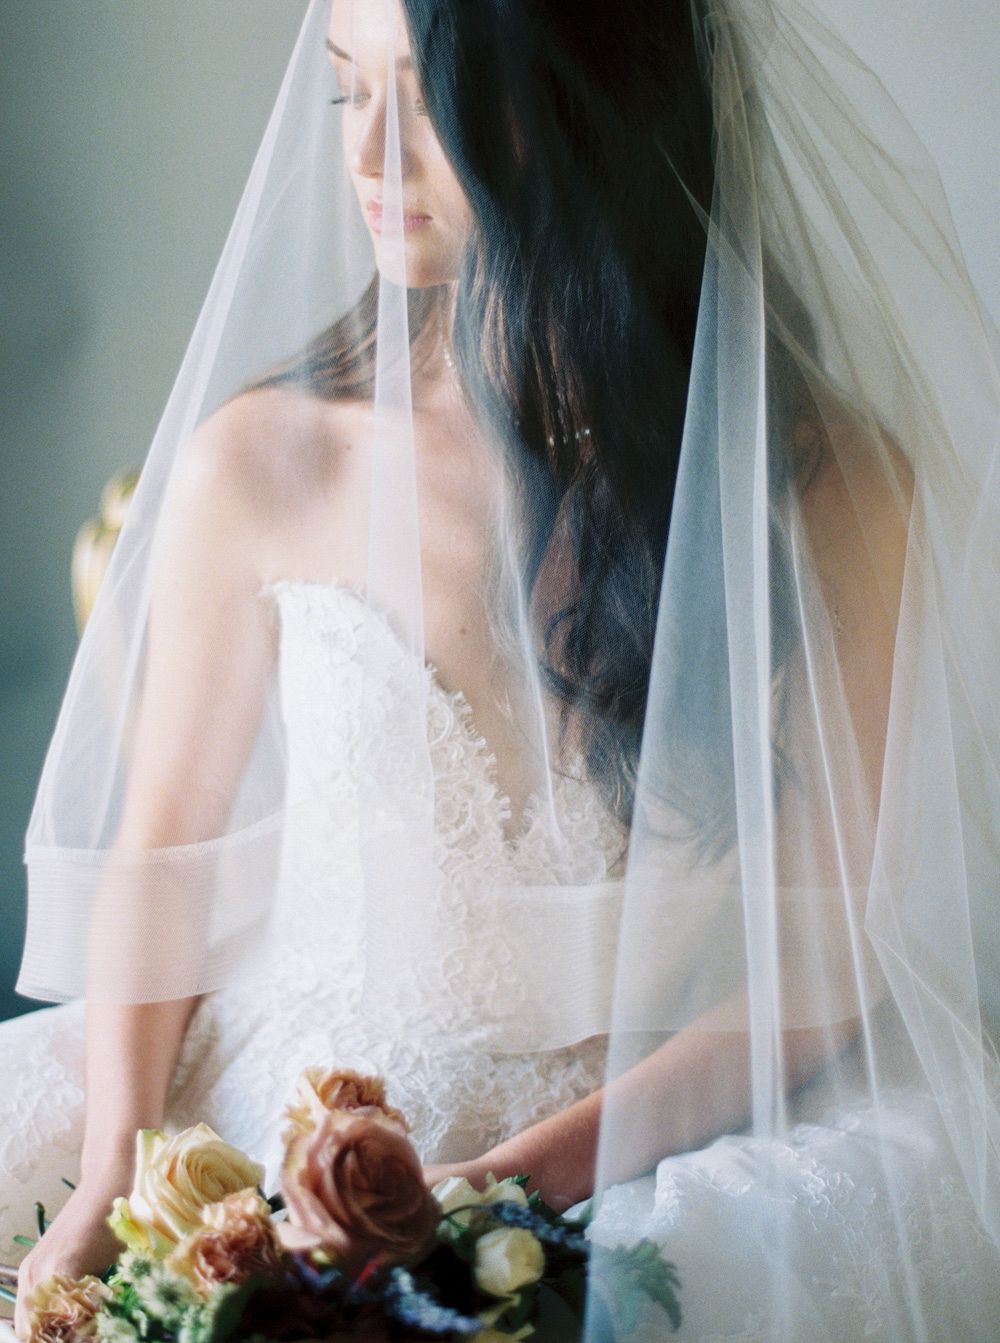 Infusing Personal Experiences into a Wedding Story